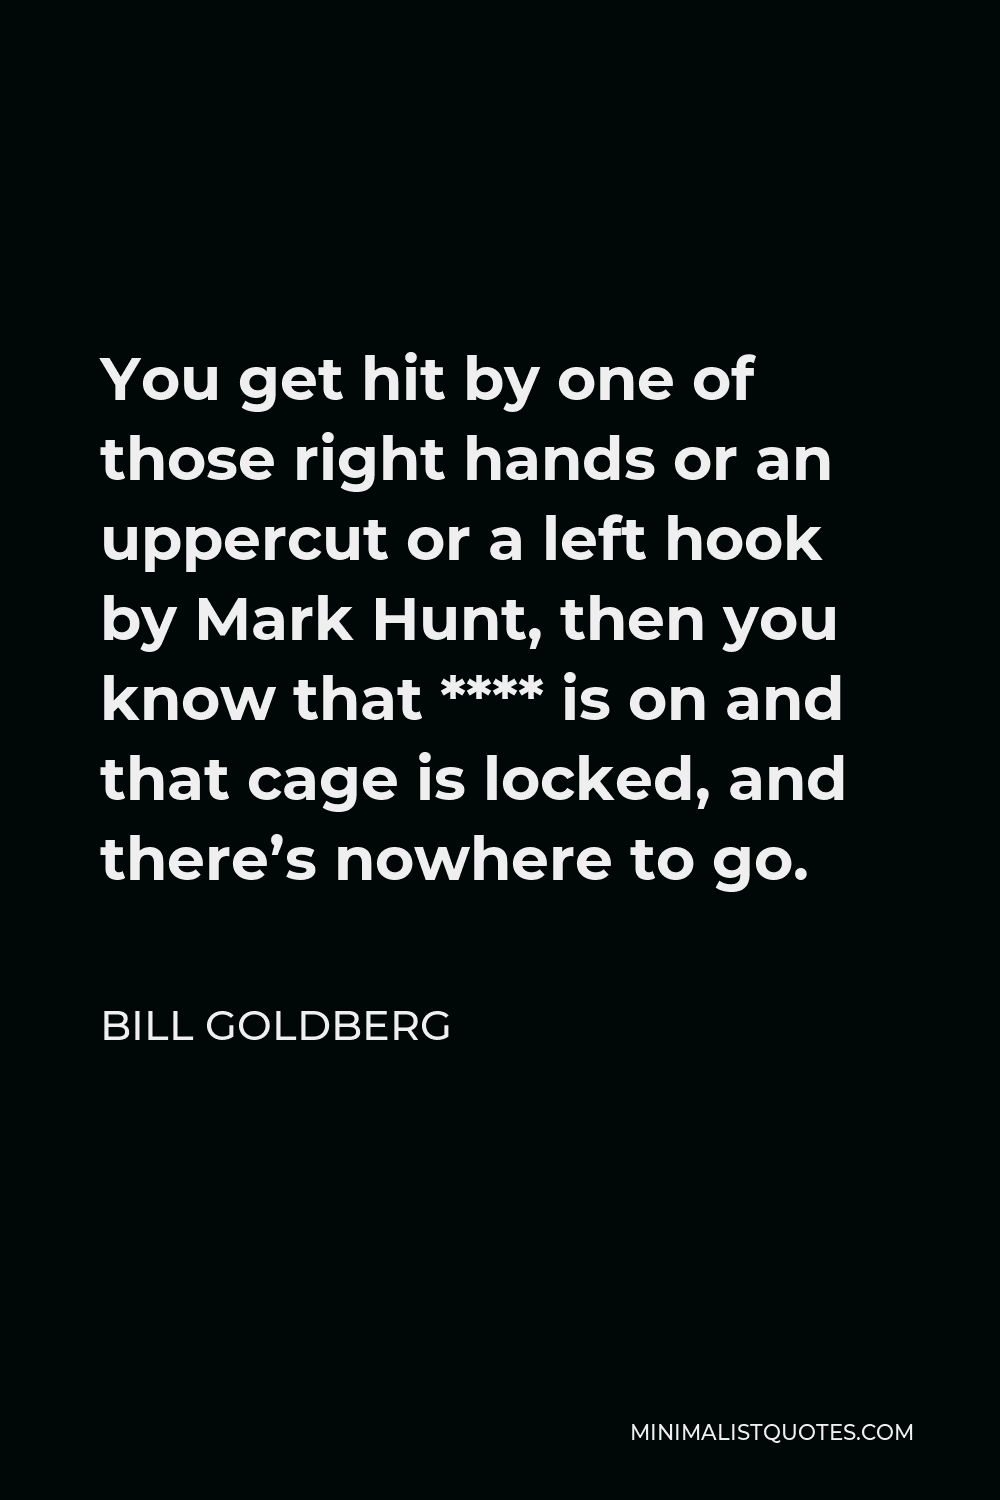 Bill Goldberg Quote - You get hit by one of those right hands or an uppercut or a left hook by Mark Hunt, then you know that **** is on and that cage is locked, and there’s nowhere to go.